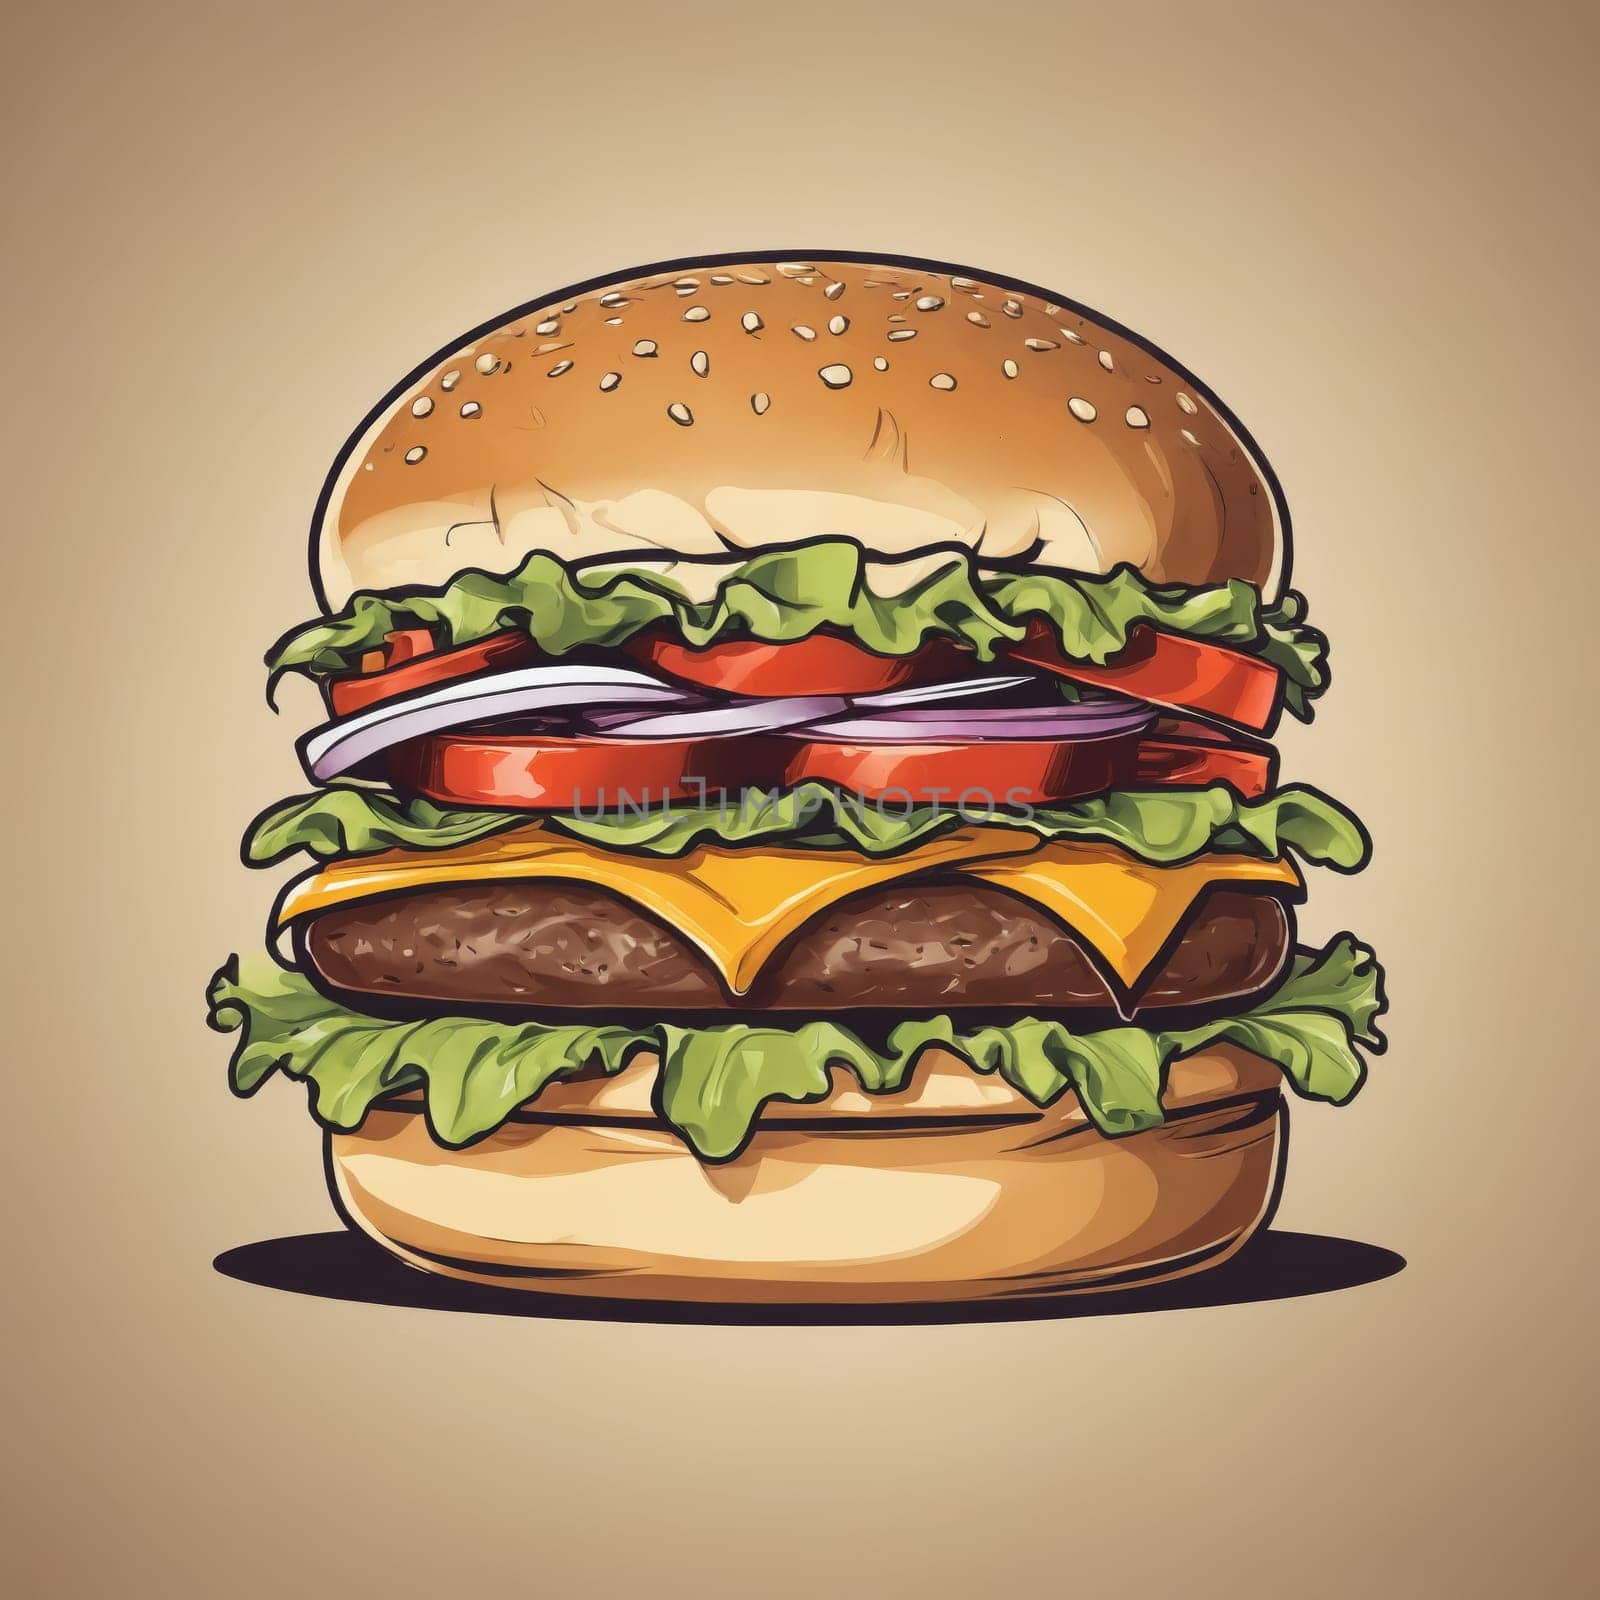 Sketch of a timeless cheeseburger captures the essence of fast food wonder—every layer promising satisfaction.